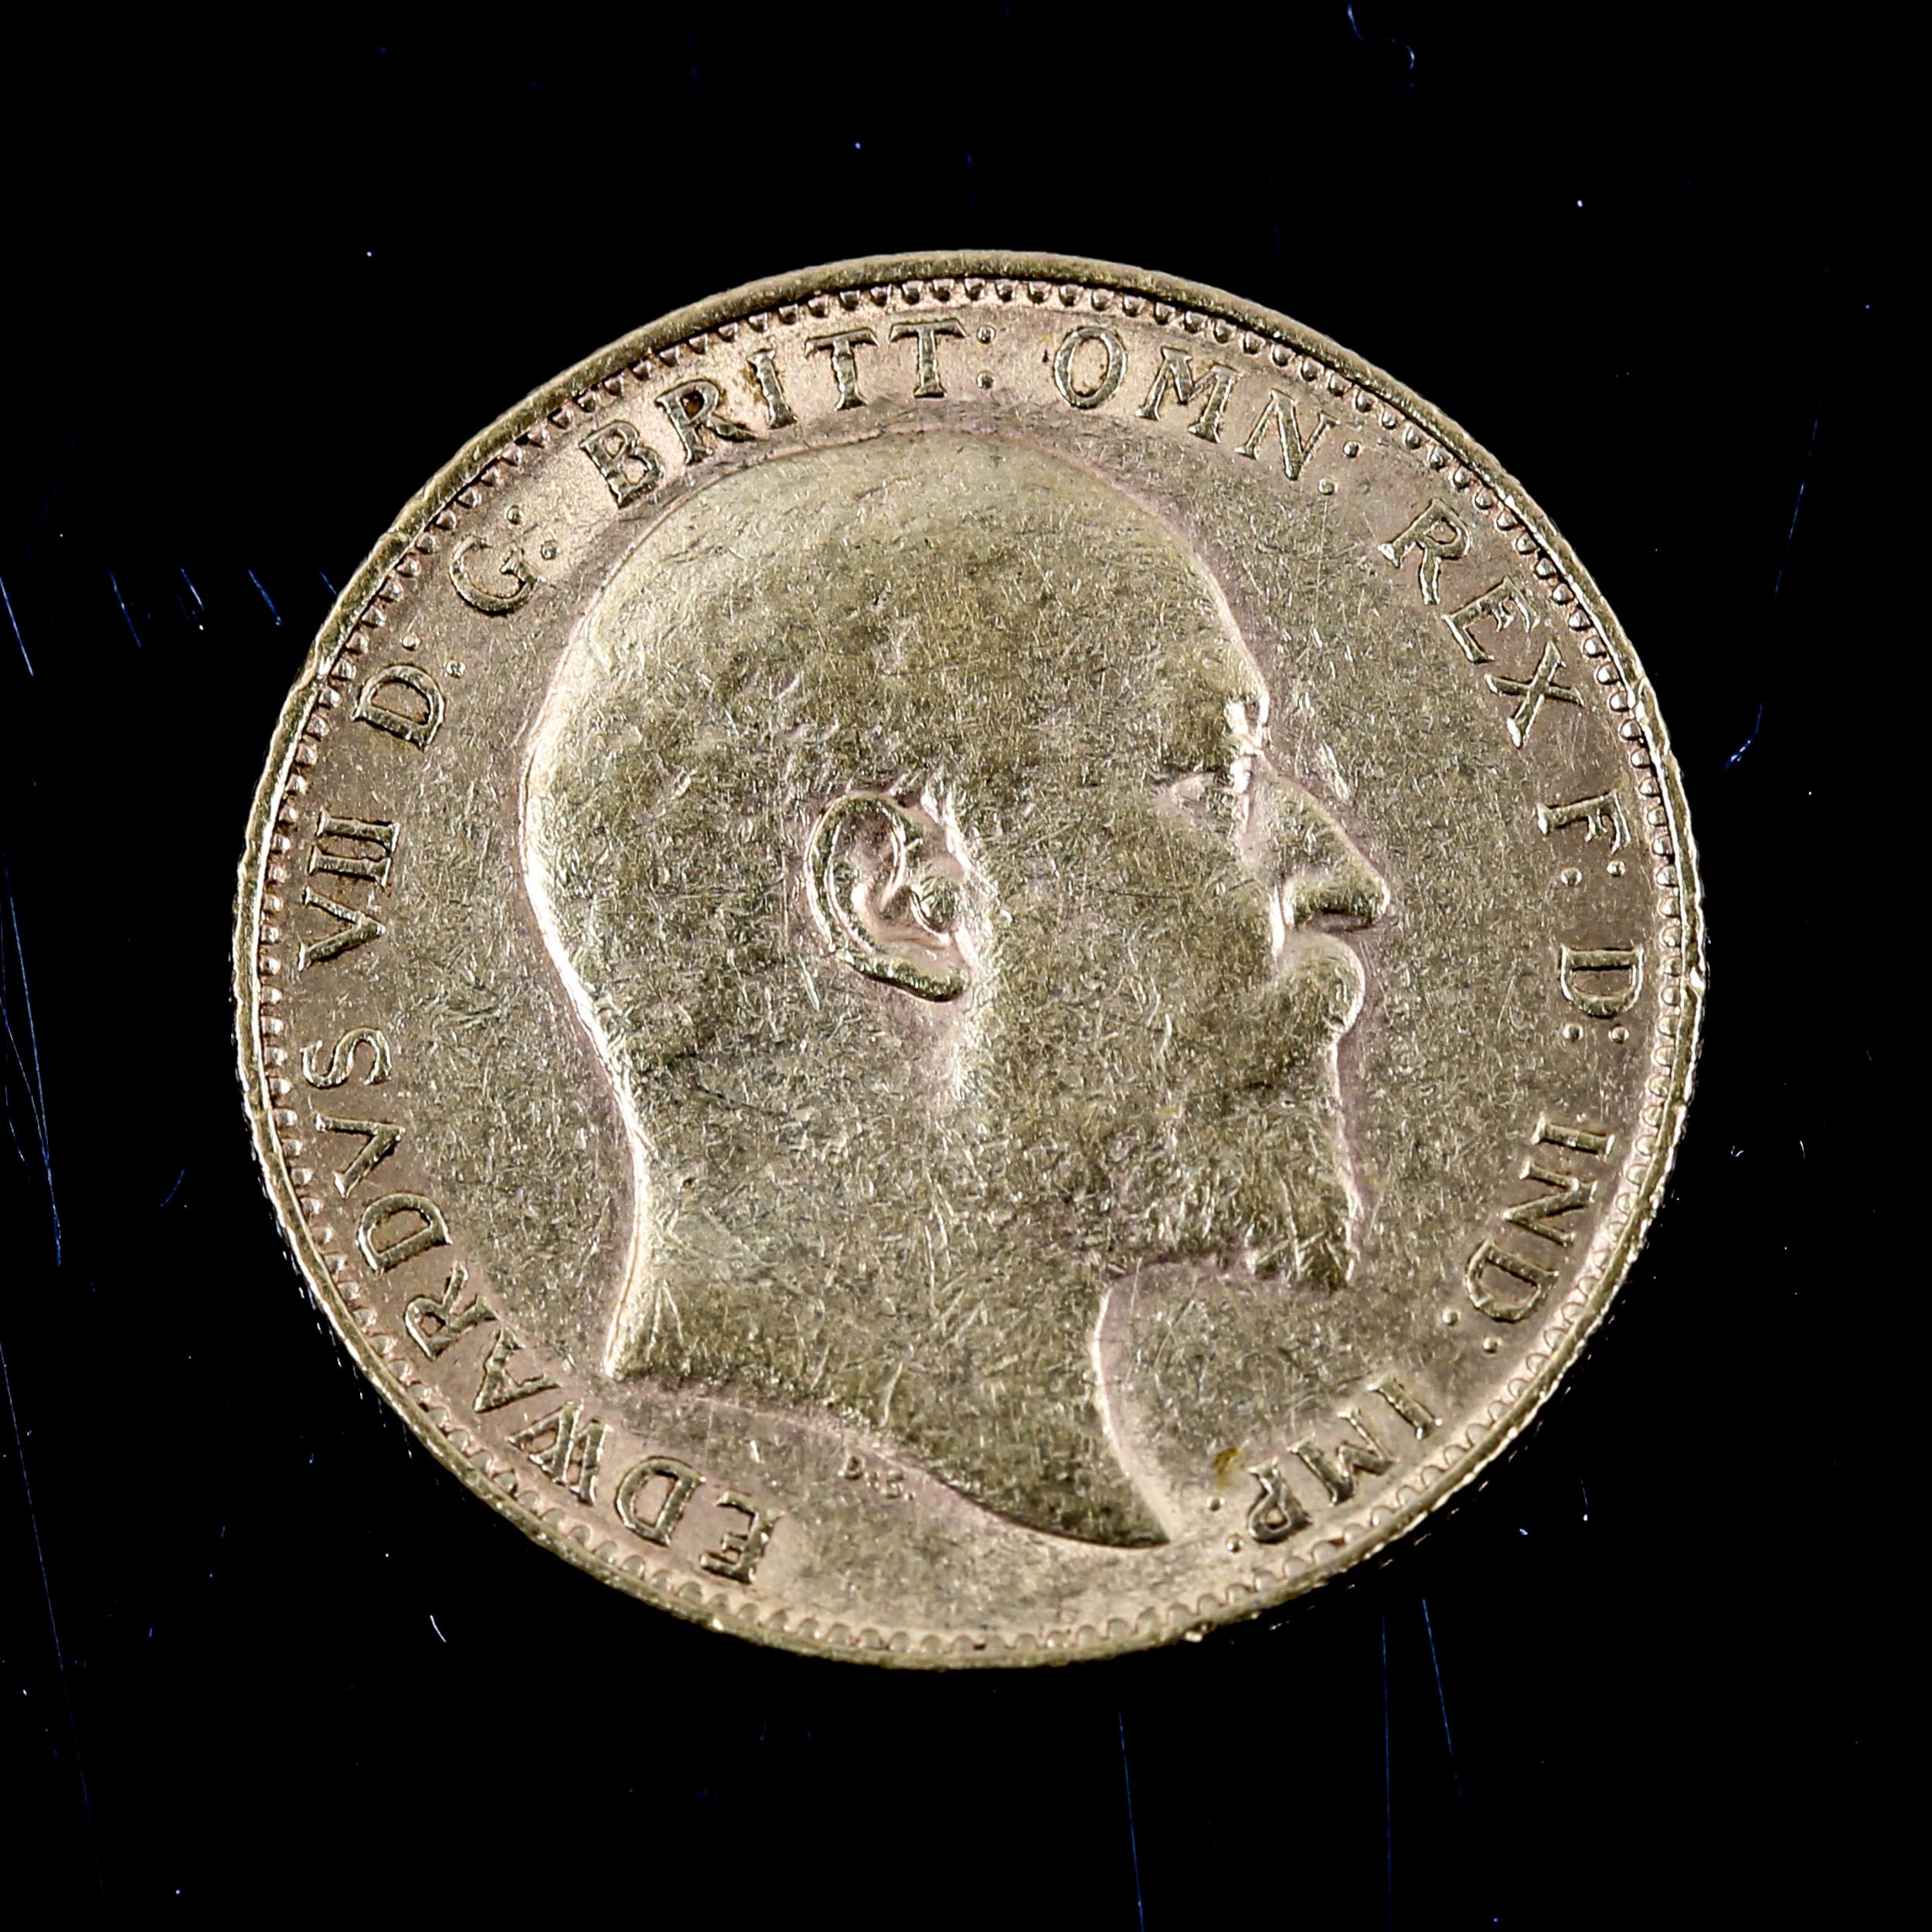 An Edward VII 1909 gold sovereign, 7.9g General wear and abrasions. - Image 2 of 3